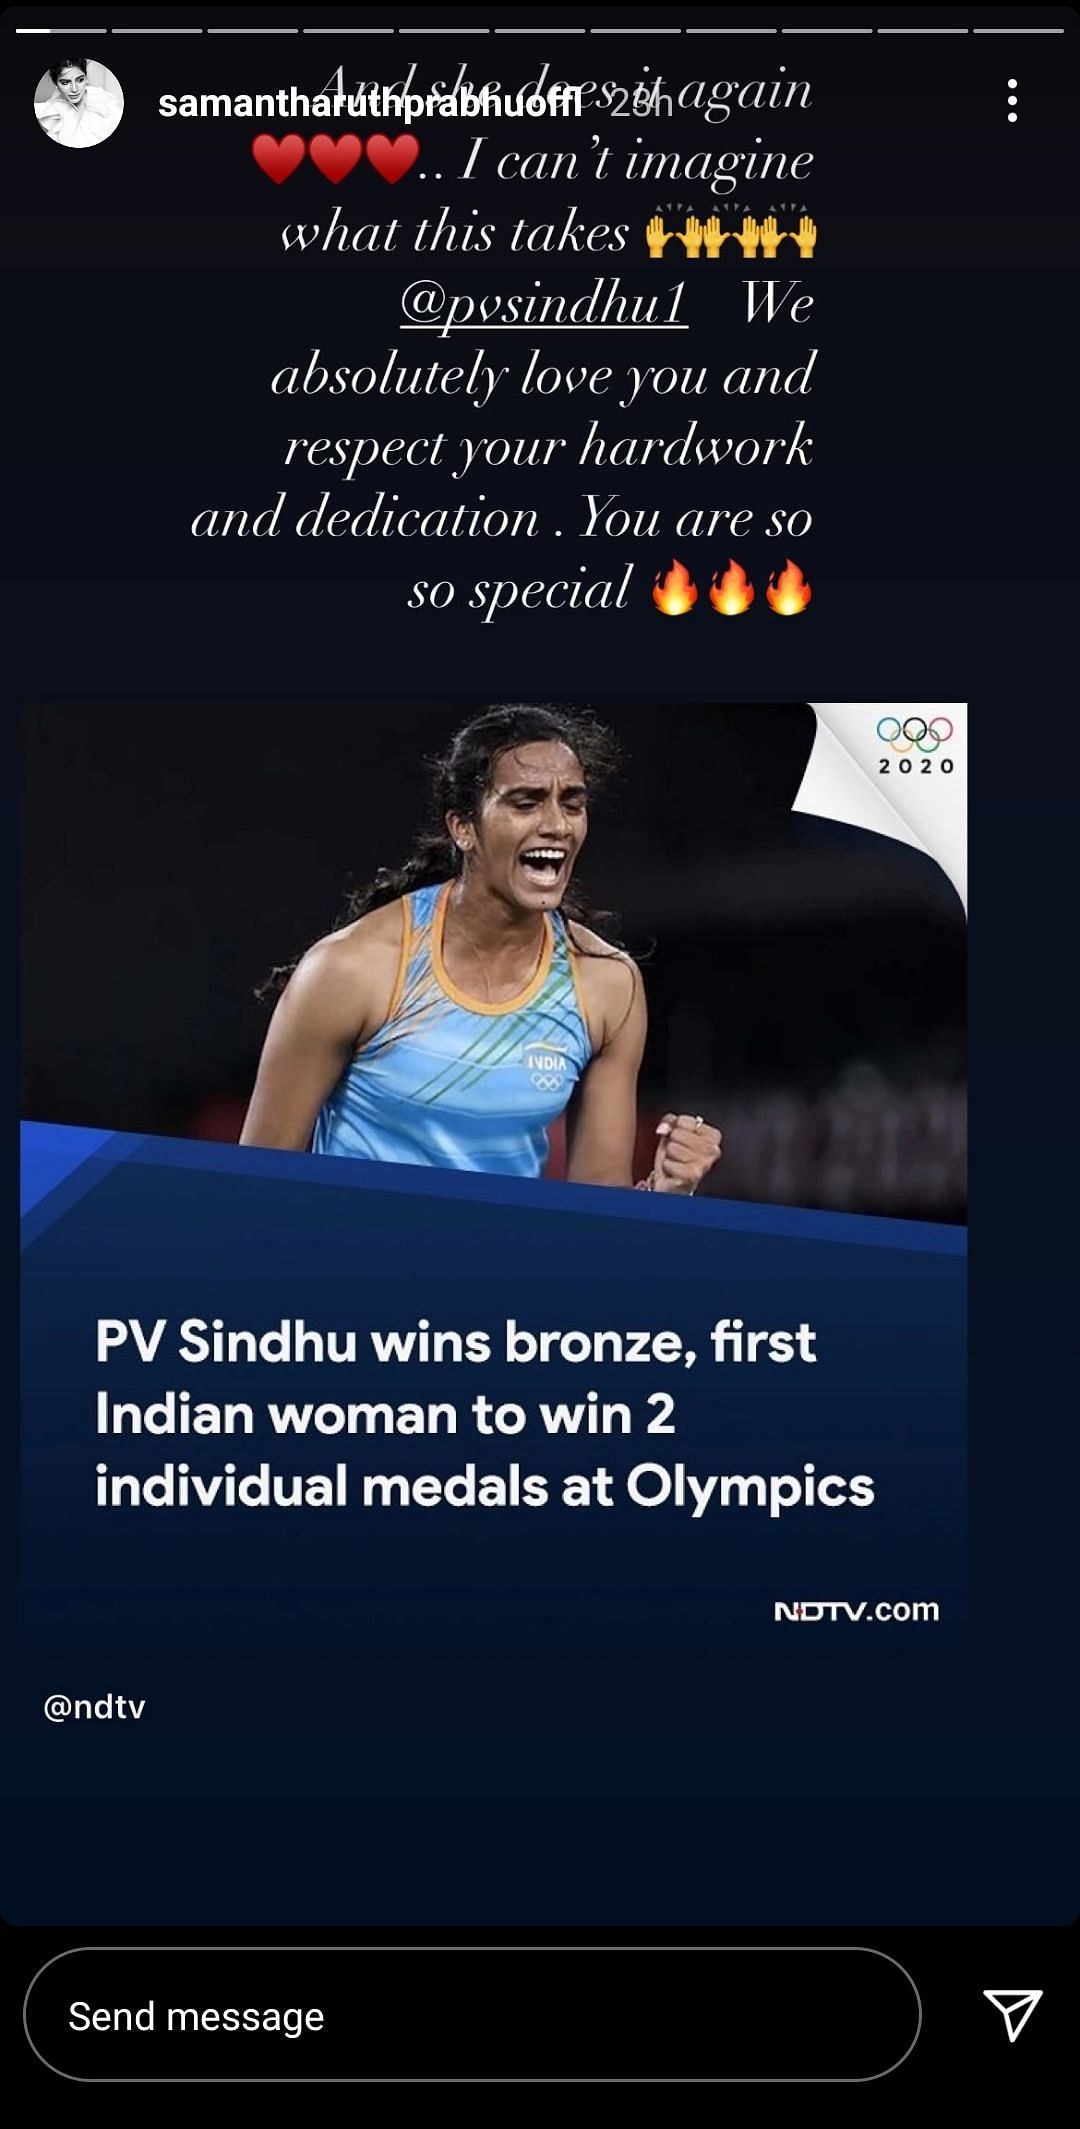 Taapsee Pannu, Arjun Kapoor, Samantha Prabhu also congratulated PV Sindhu and the Indian women's hockey team.